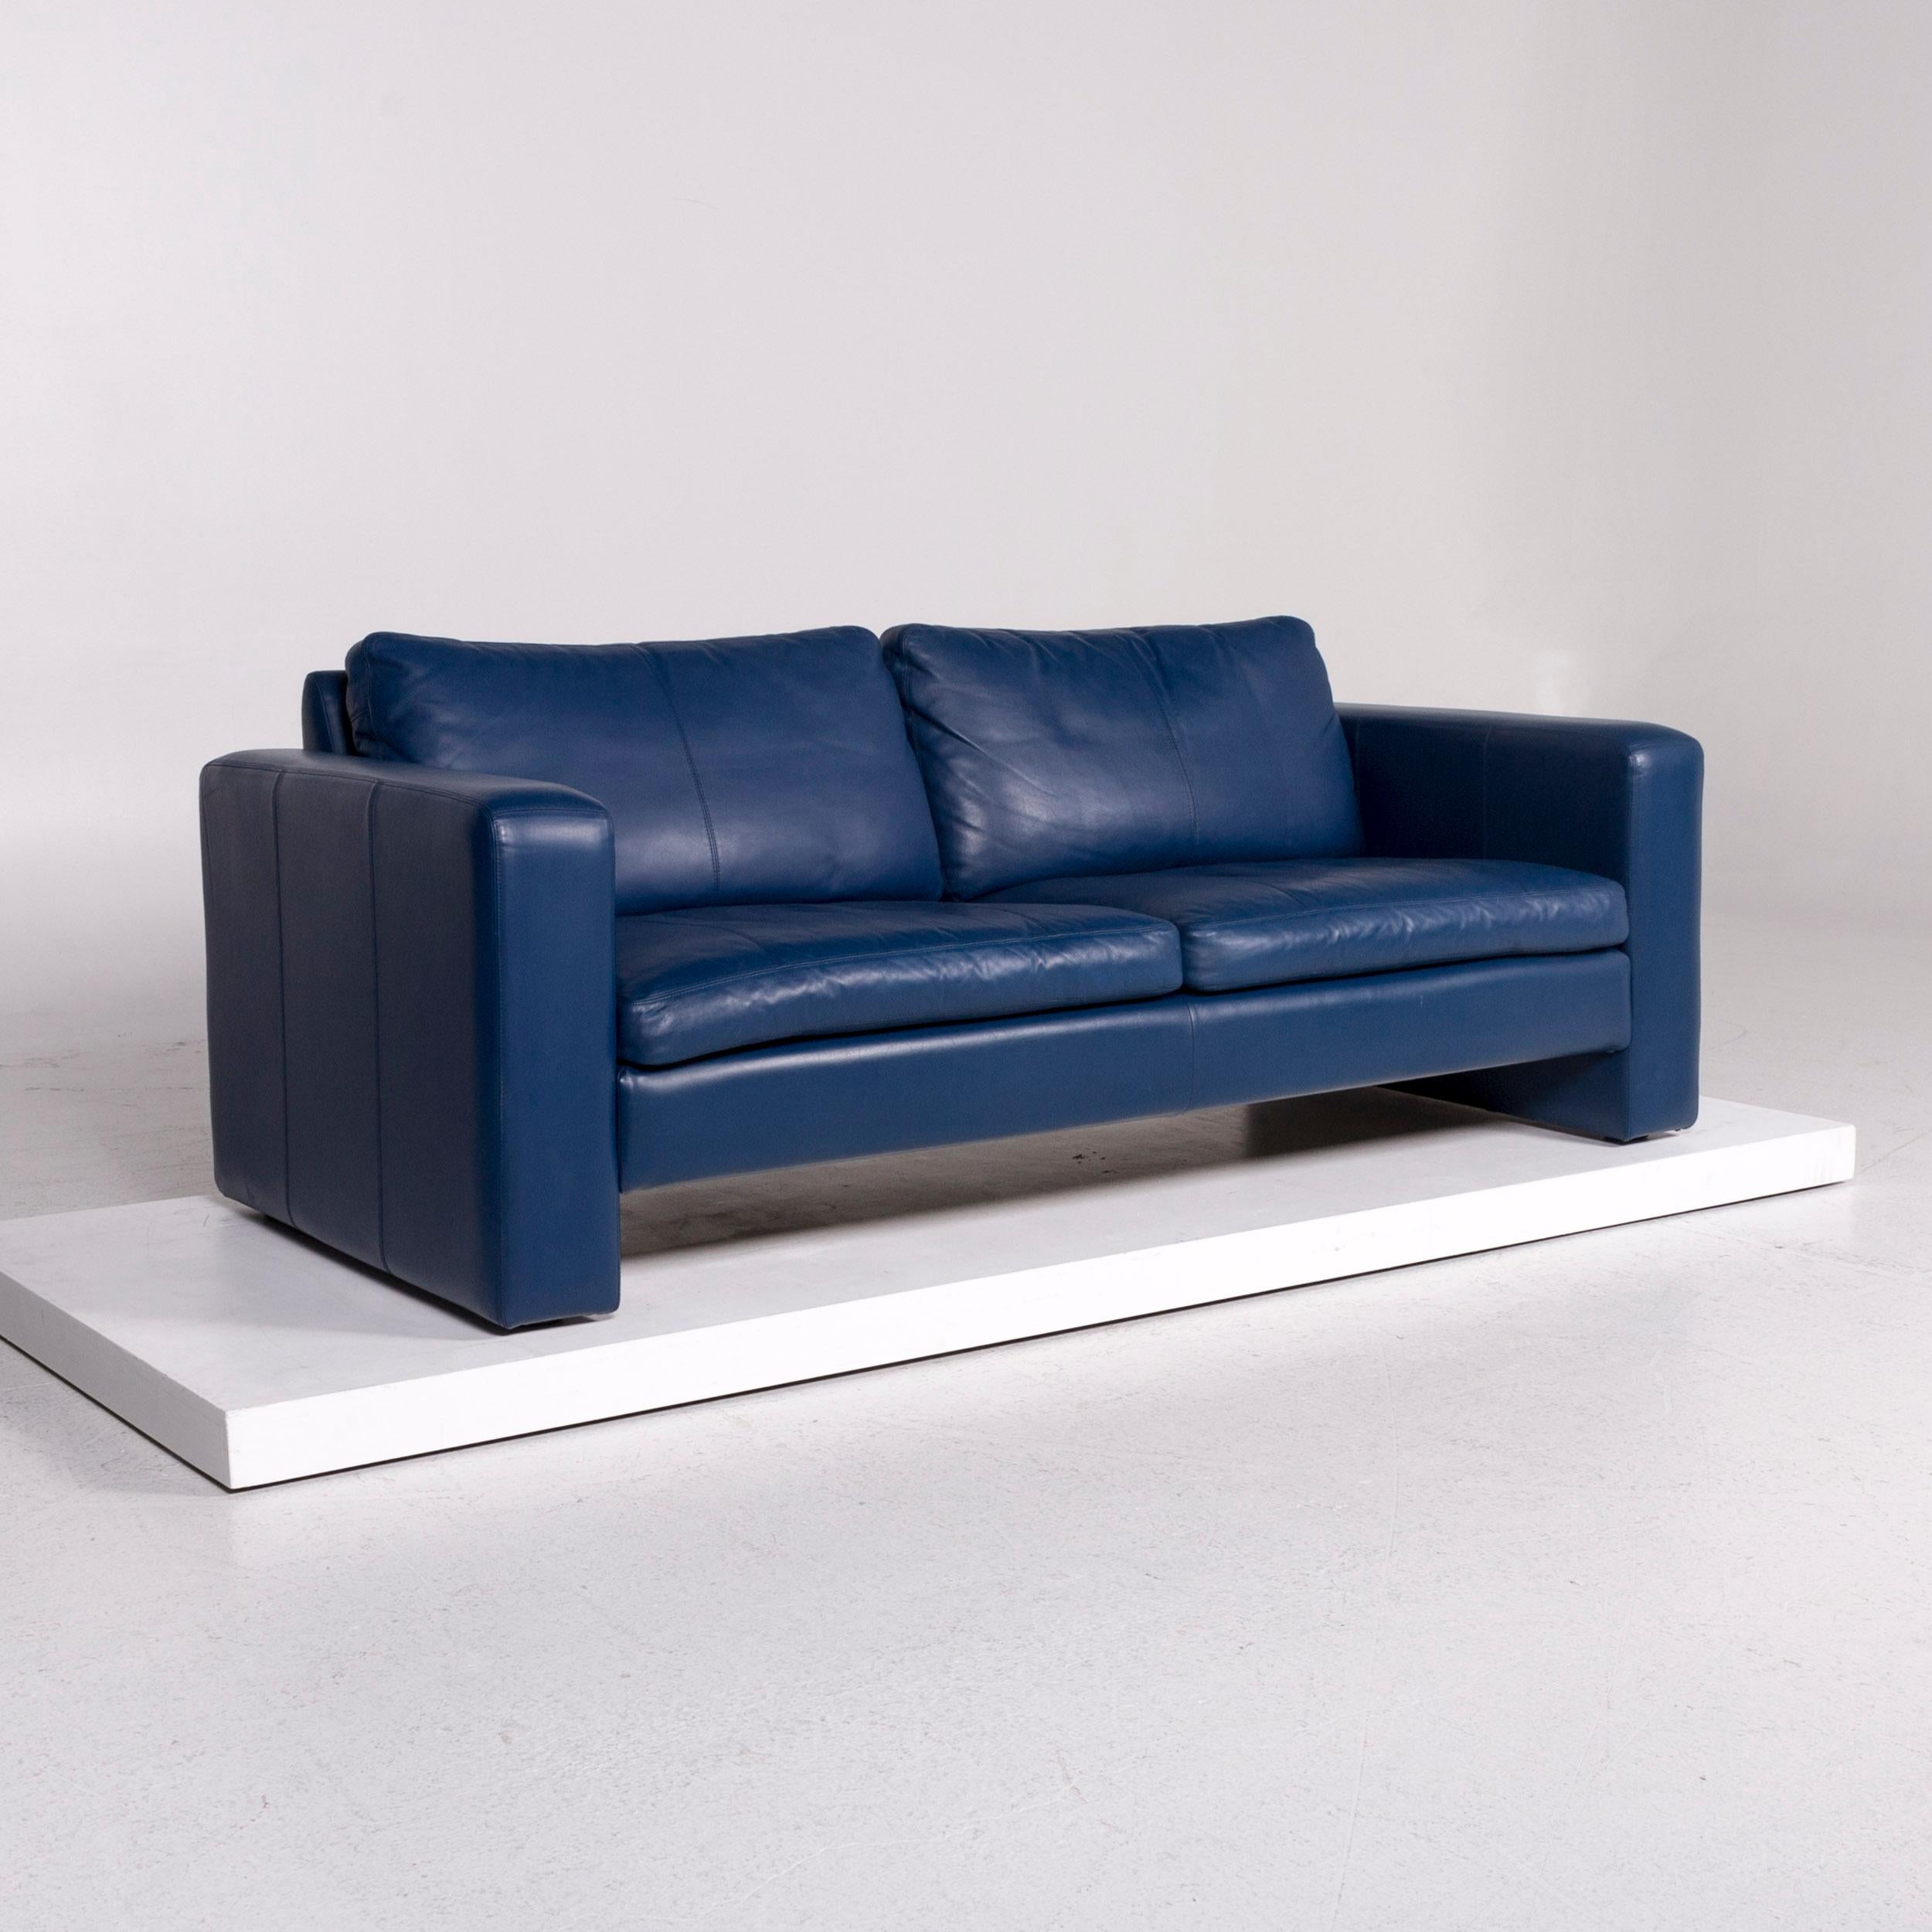 We bring to you a COR Conseta leather sofa blue two-seat couch.
 

 Product measurements in centimeters:
 

Depth 87
Width 192
Height 73
Seat-height 41
Rest-height 59
Seat-depth 52
Seat-width 158
Back-height 32.
 